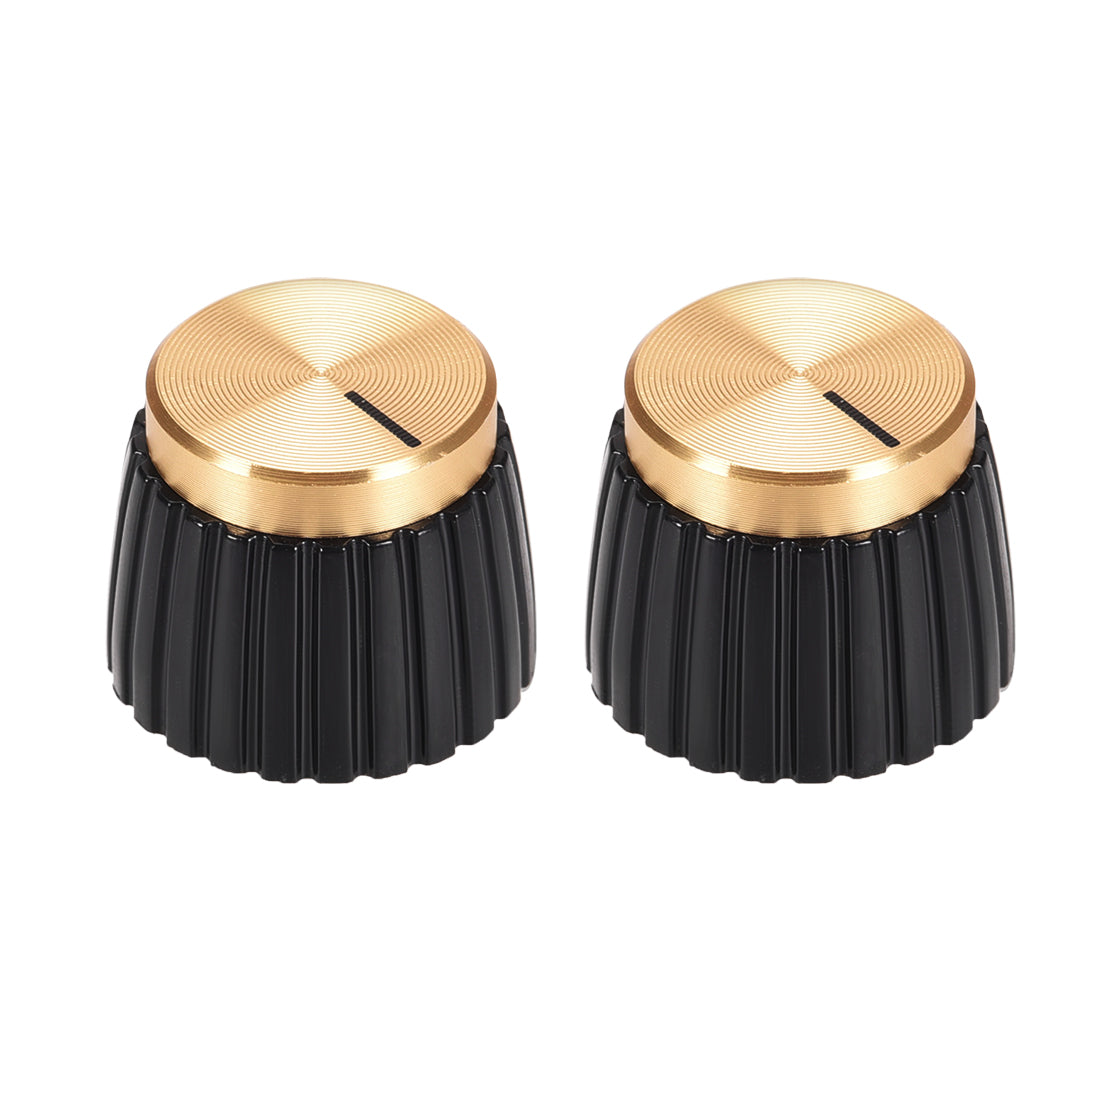 uxcell Uxcell 2pcs Potentiometer Knob  Style Amplifier Replacement Knob Black with Gold Cap Volume Control Knob